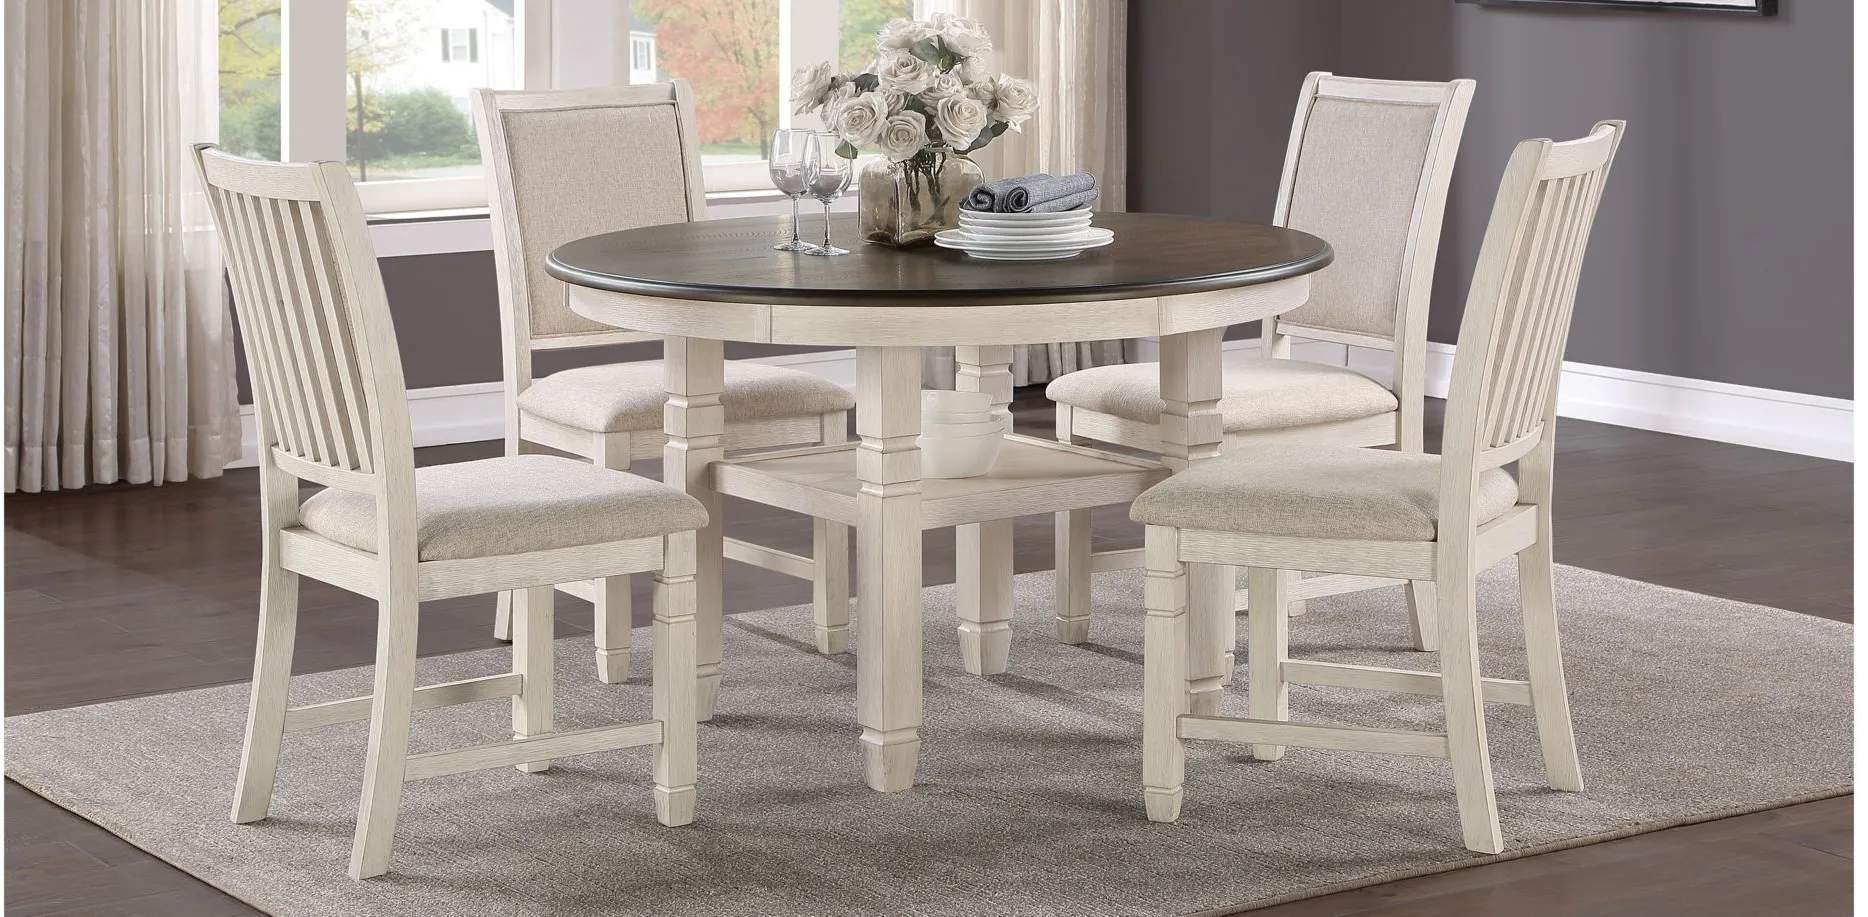 Arlana 5-pc. Dining Set in Antique White by Homelegance